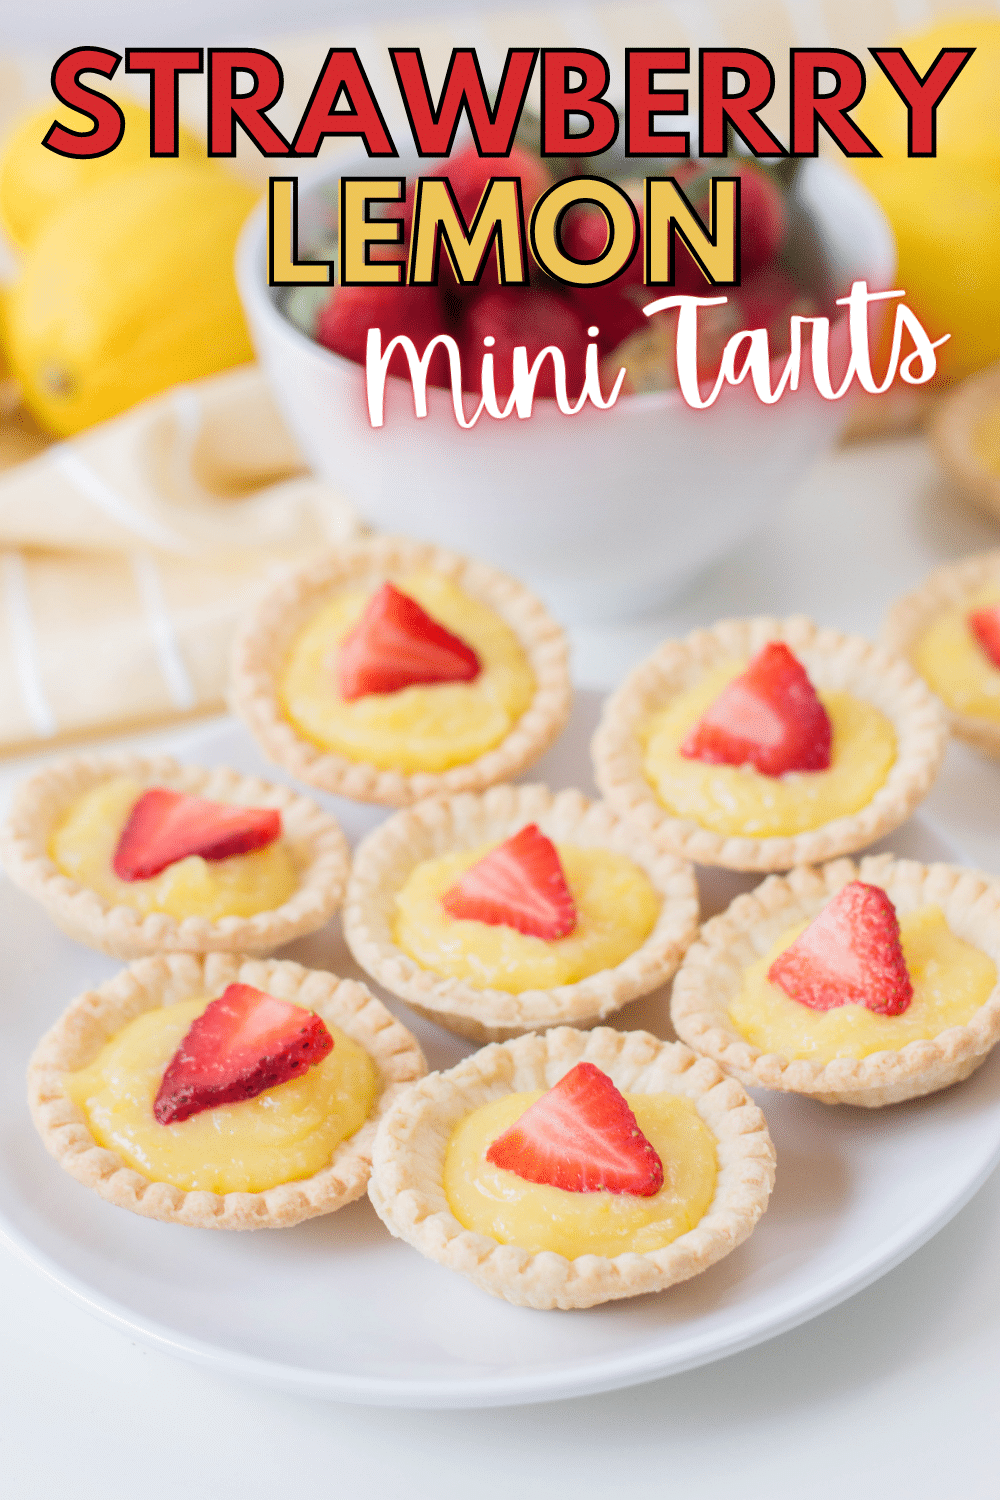 Mini Strawberry Lemon Tarts are an easy spring dessert full of delicious lemon flavor. Using mini pie shells saves time and makes this simple to make. #lemontarts #strawberry #easydesserts via @wondermomwannab